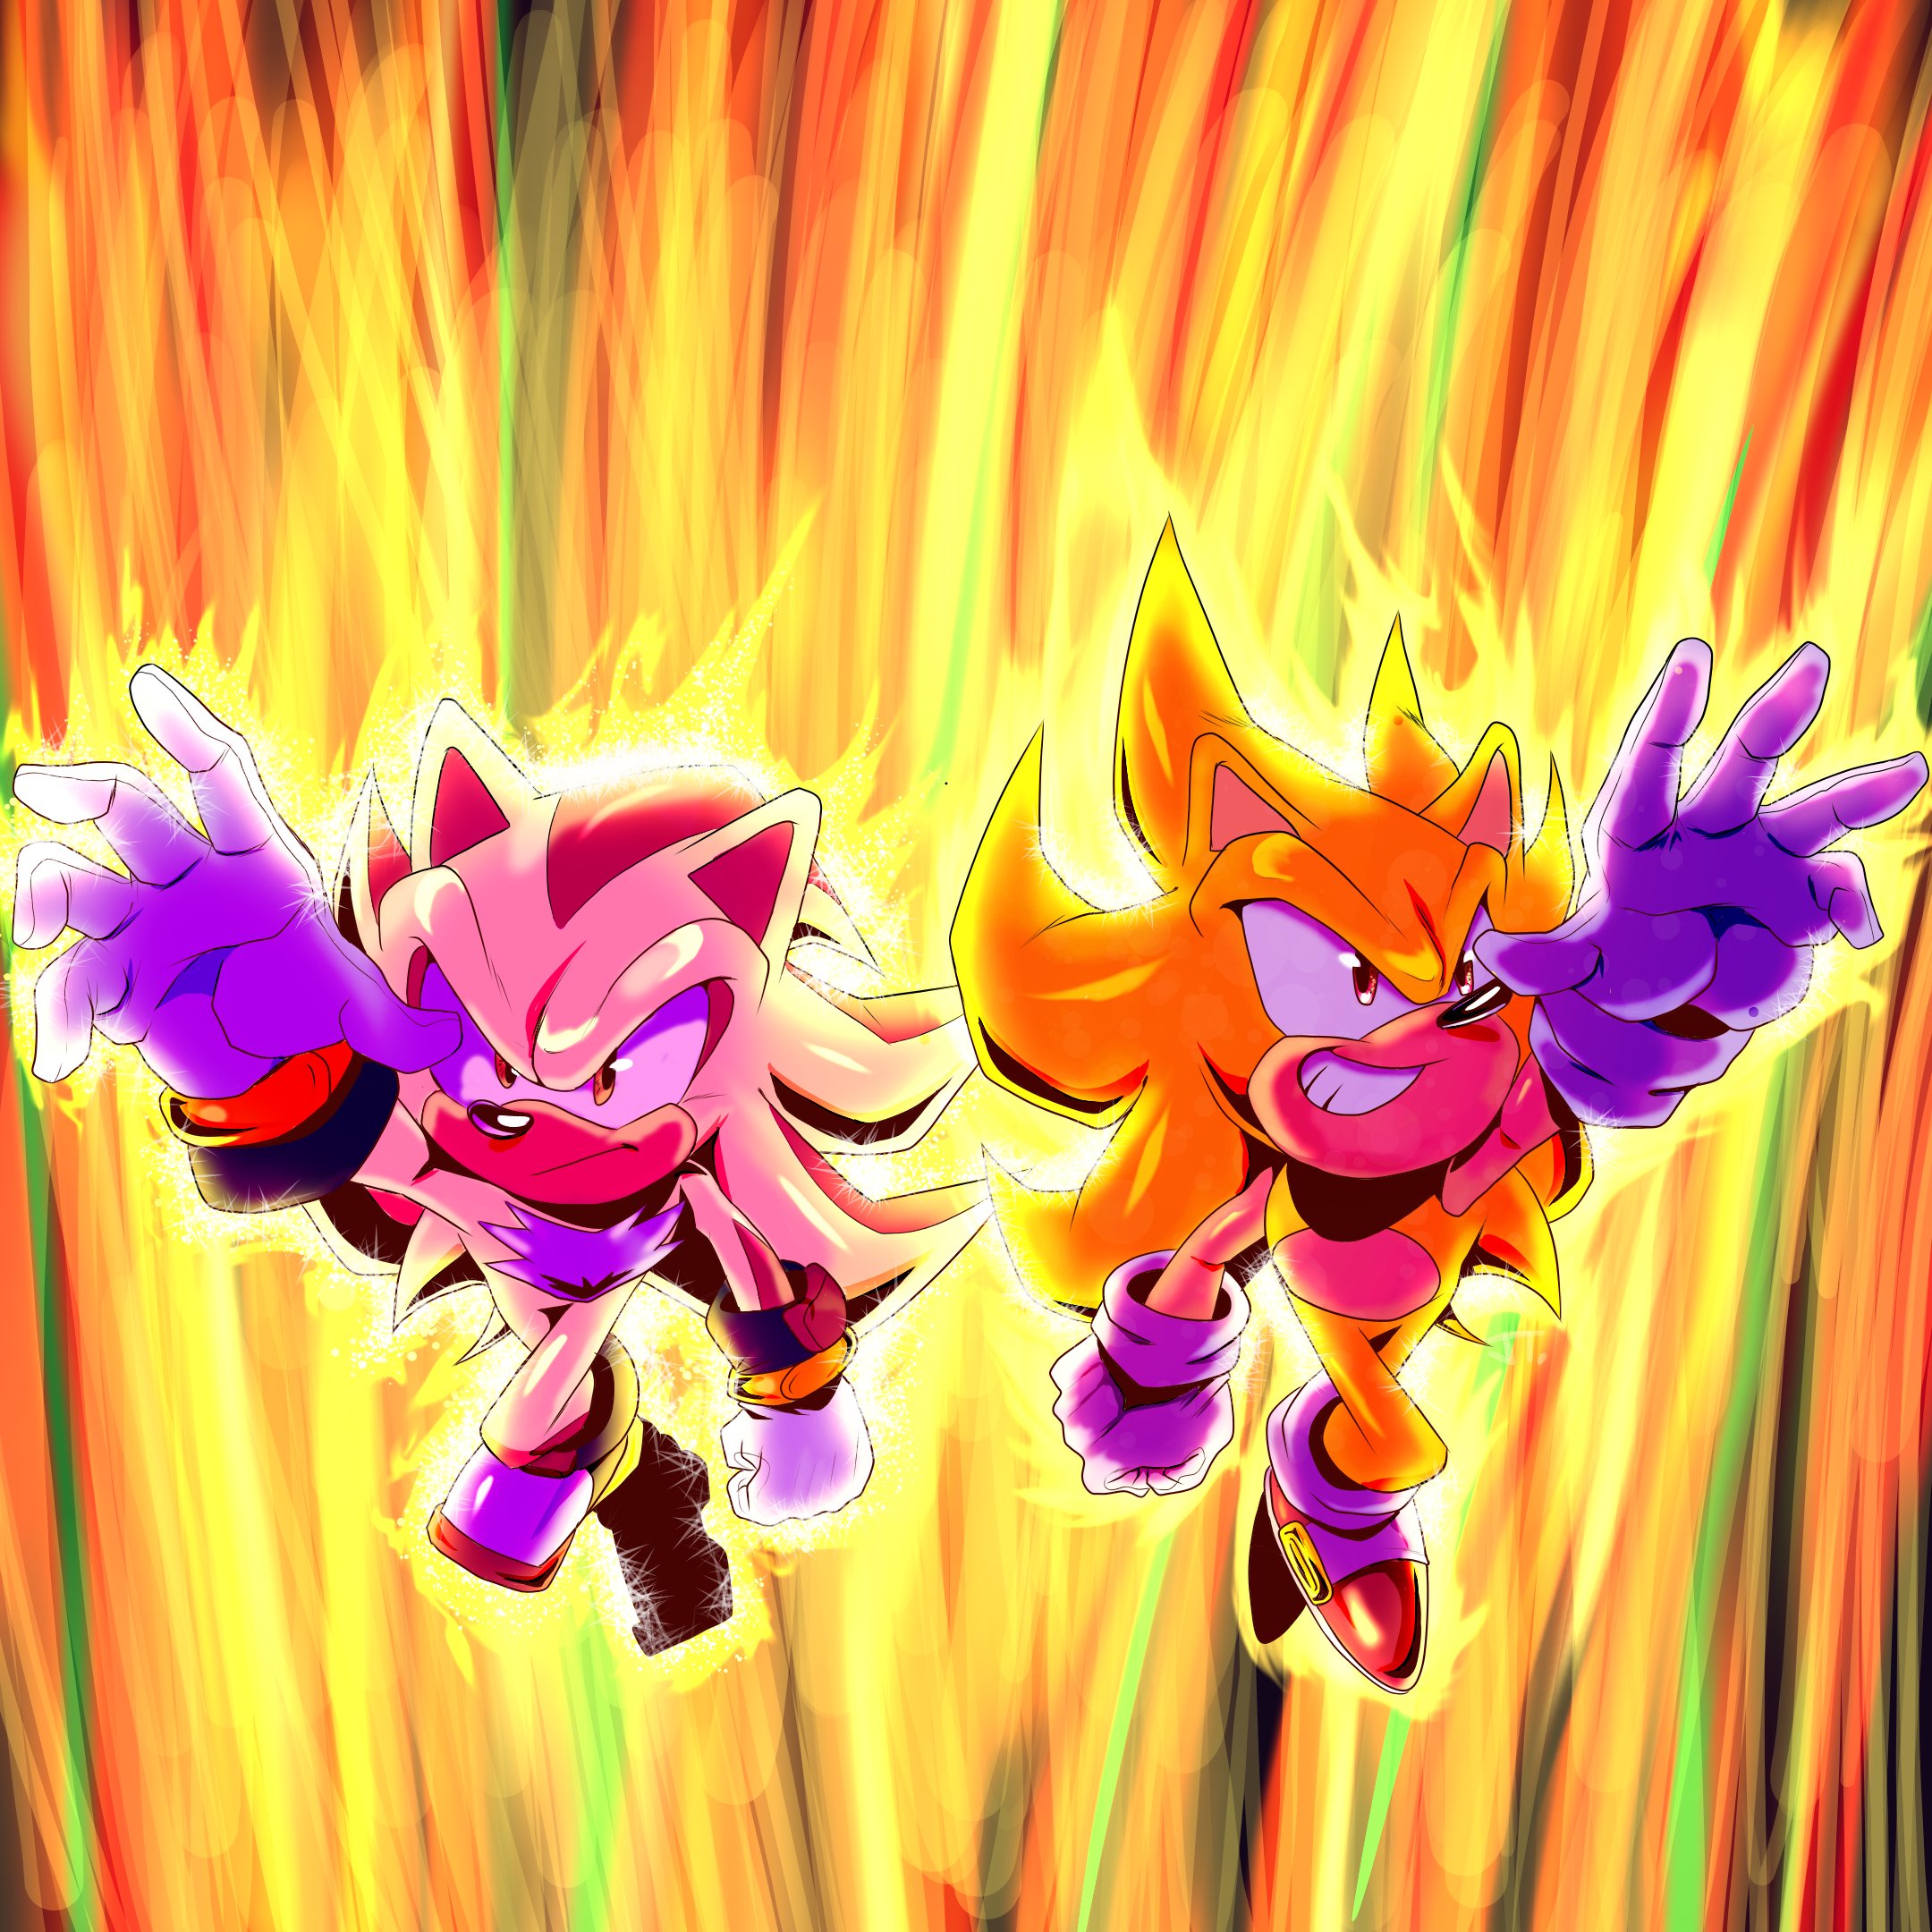 super sonic and shadow - Shadow The Hedgehog Wallpaper (44356155 ...